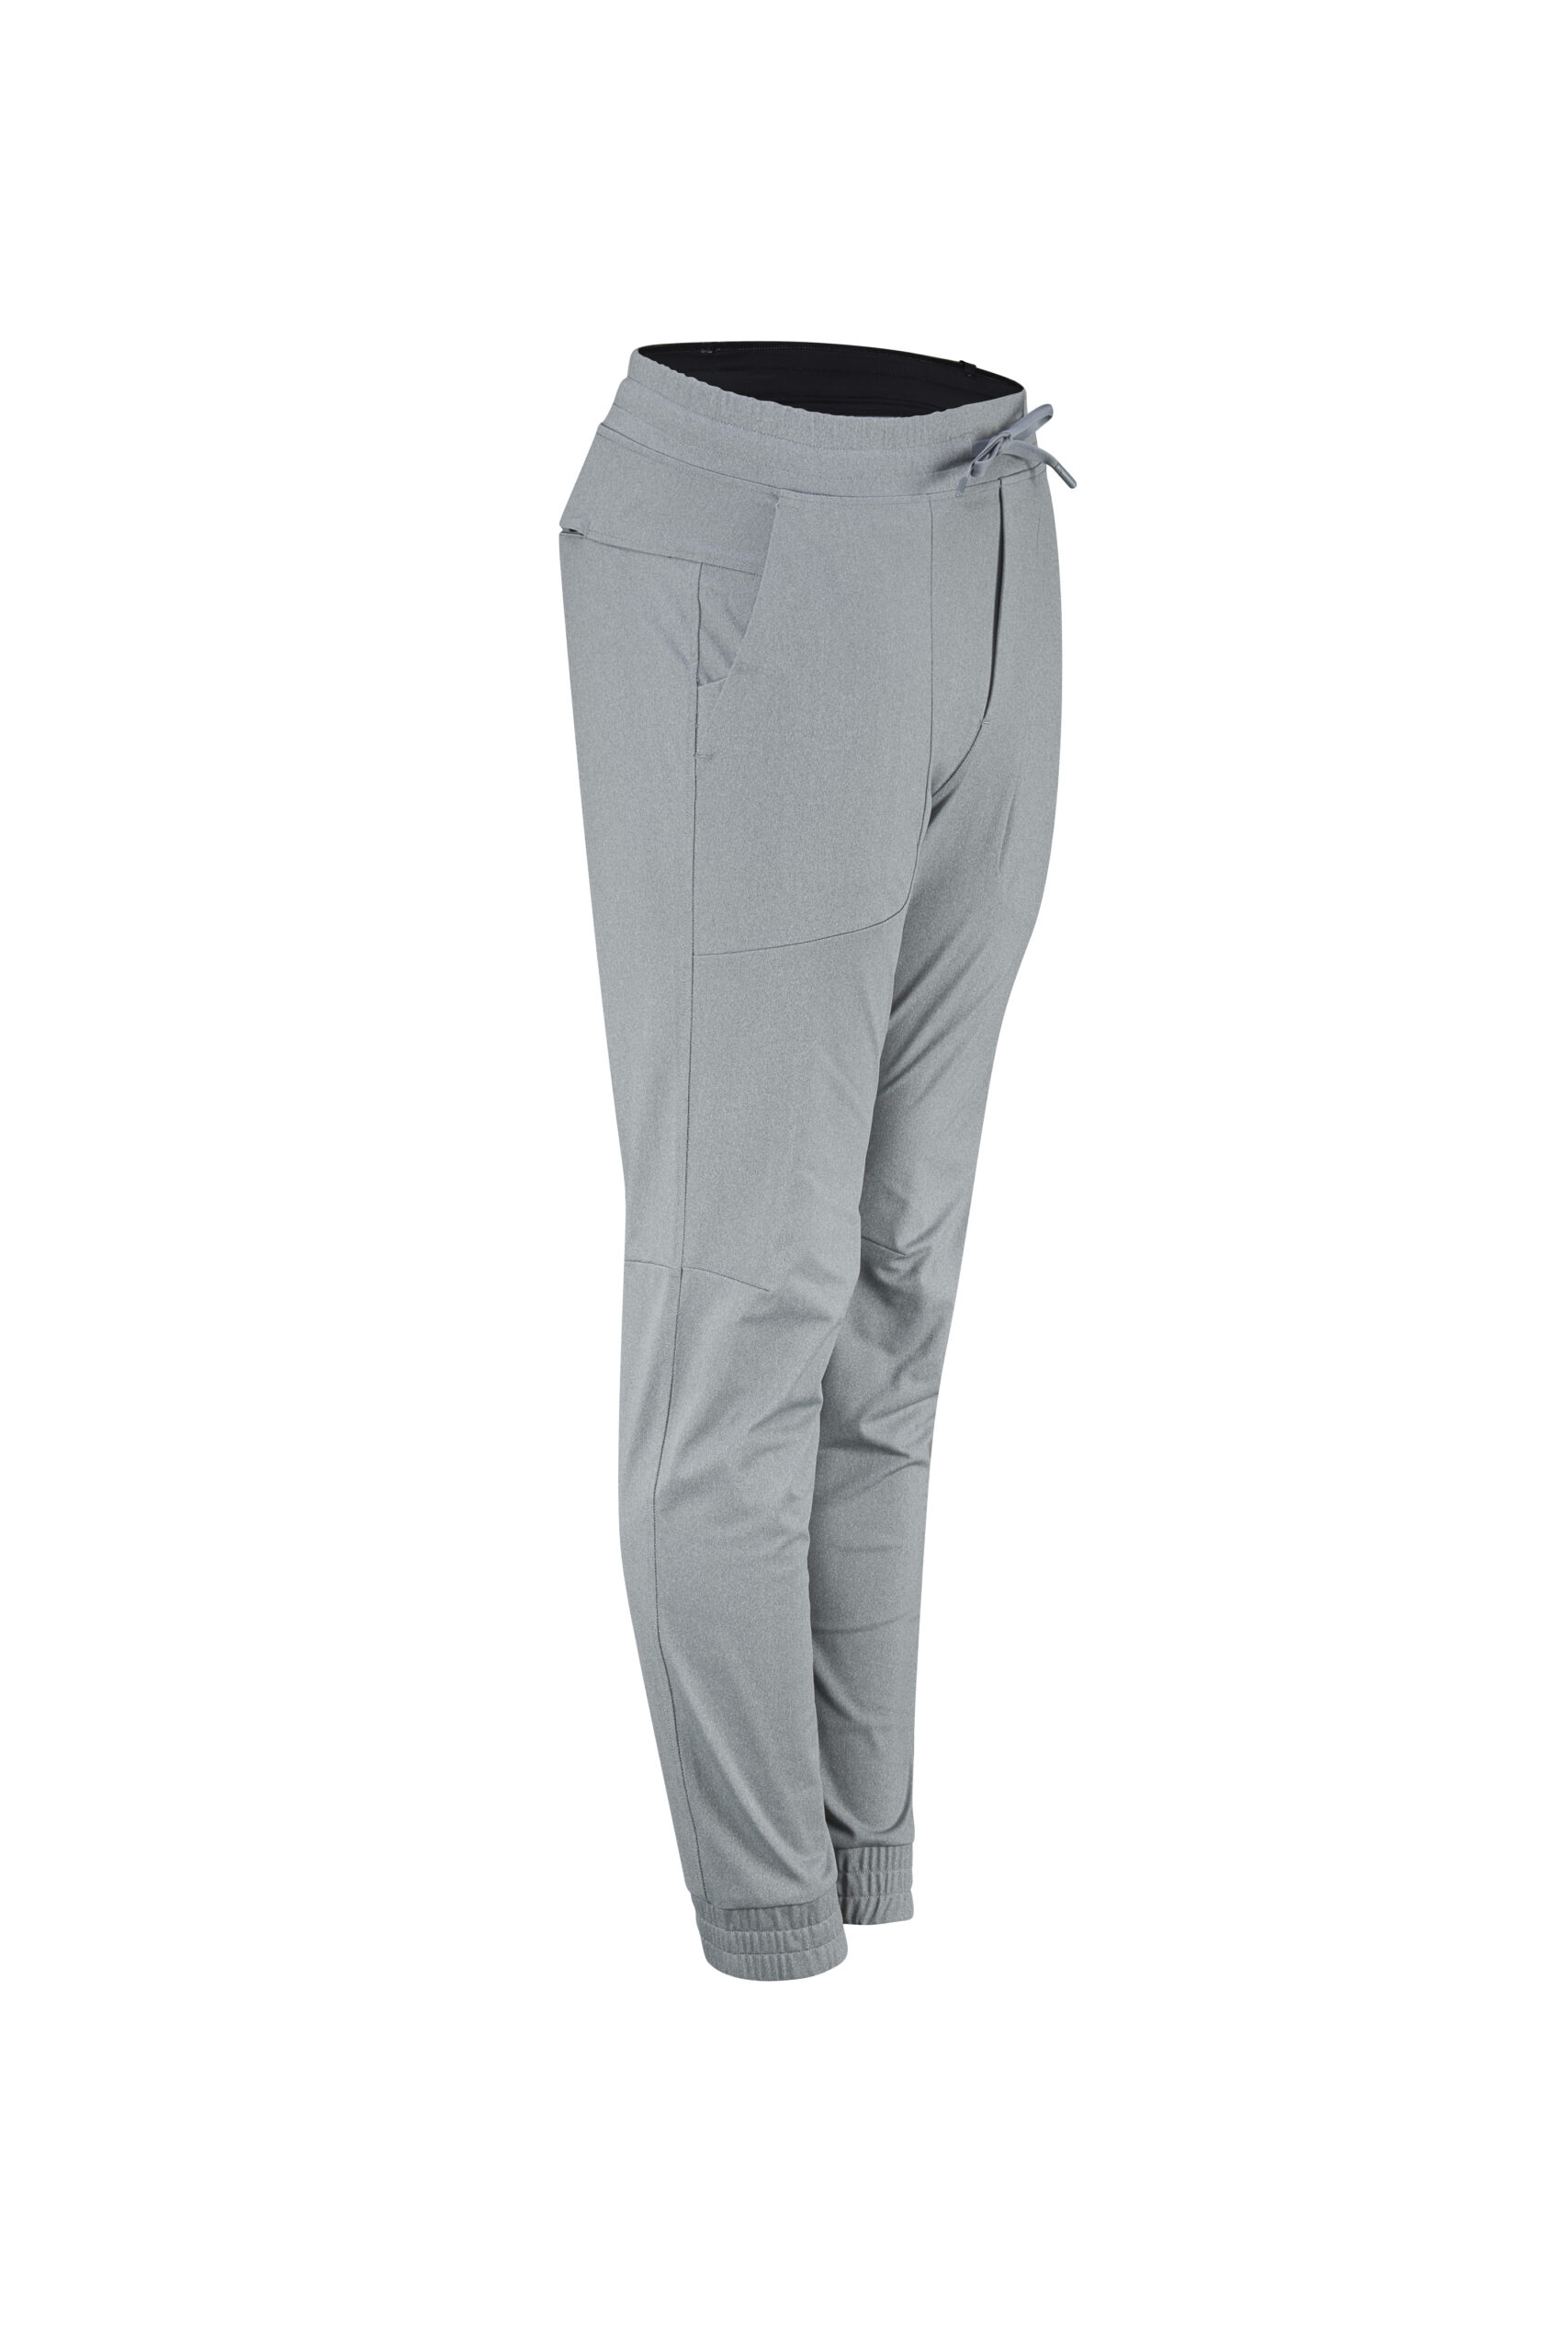 notice Sidewalk present The ABC Pant by Lululemon is the Ultimate Wardrobe Essential -